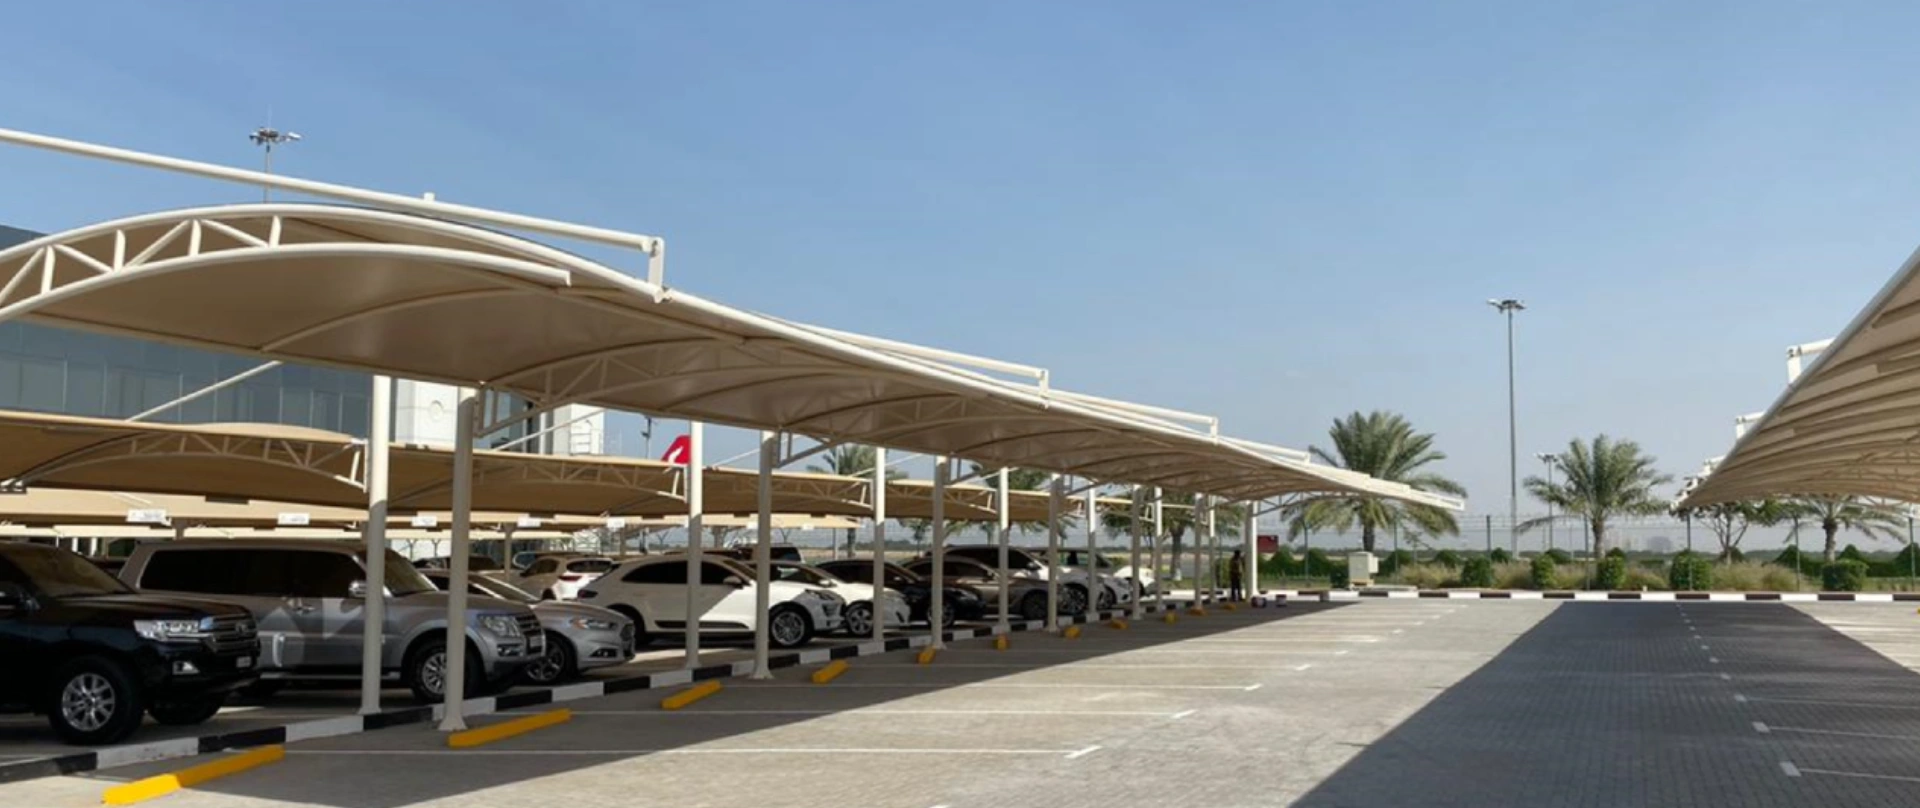 tensile parking shed project Sharjaha airport UAE